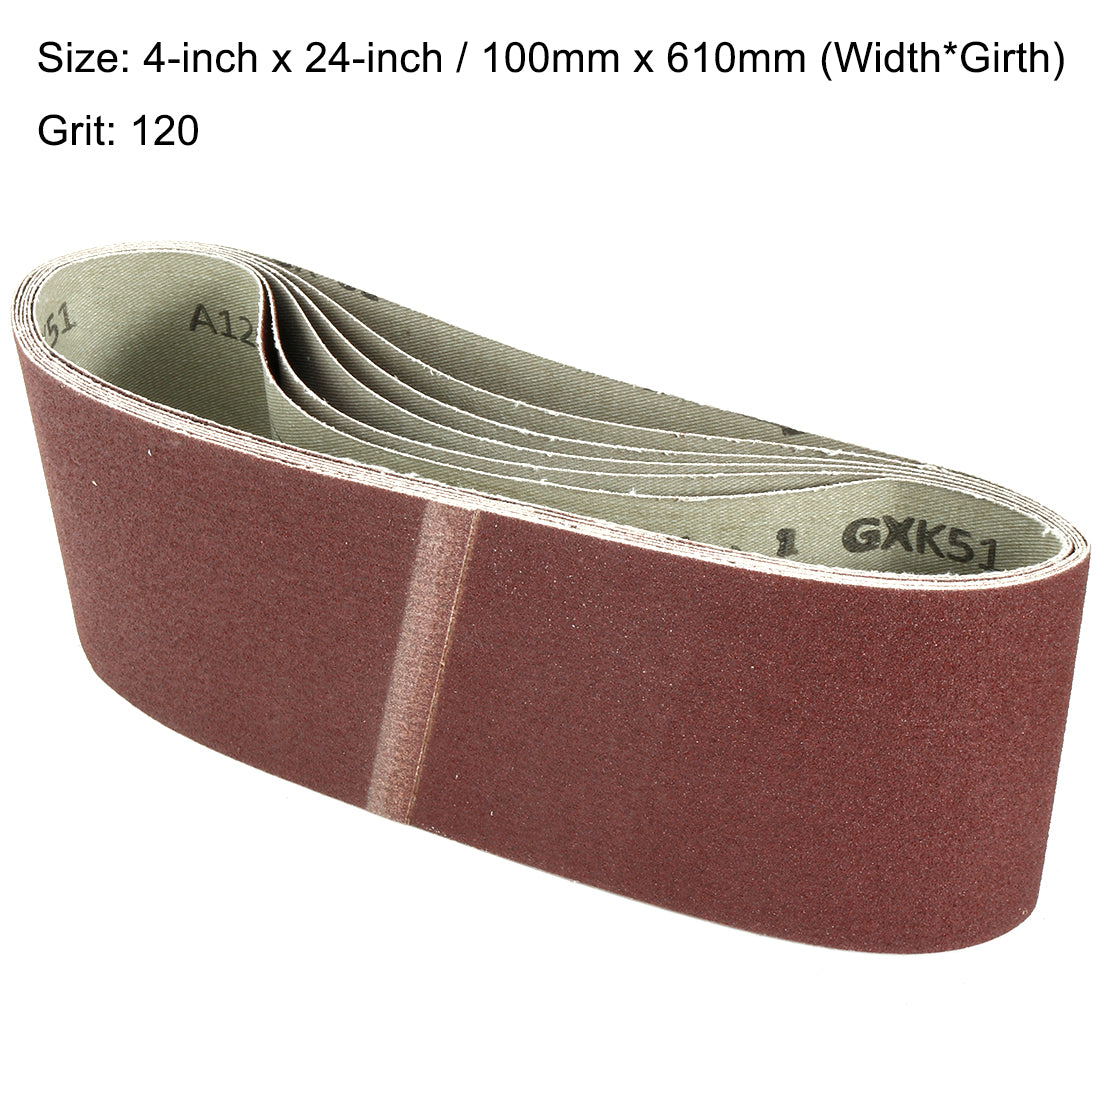 uxcell Uxcell 4-Inch x 24-Inch Aluminum Oxide Sanding Belt 120 Grits Lapped Joint 6pcs